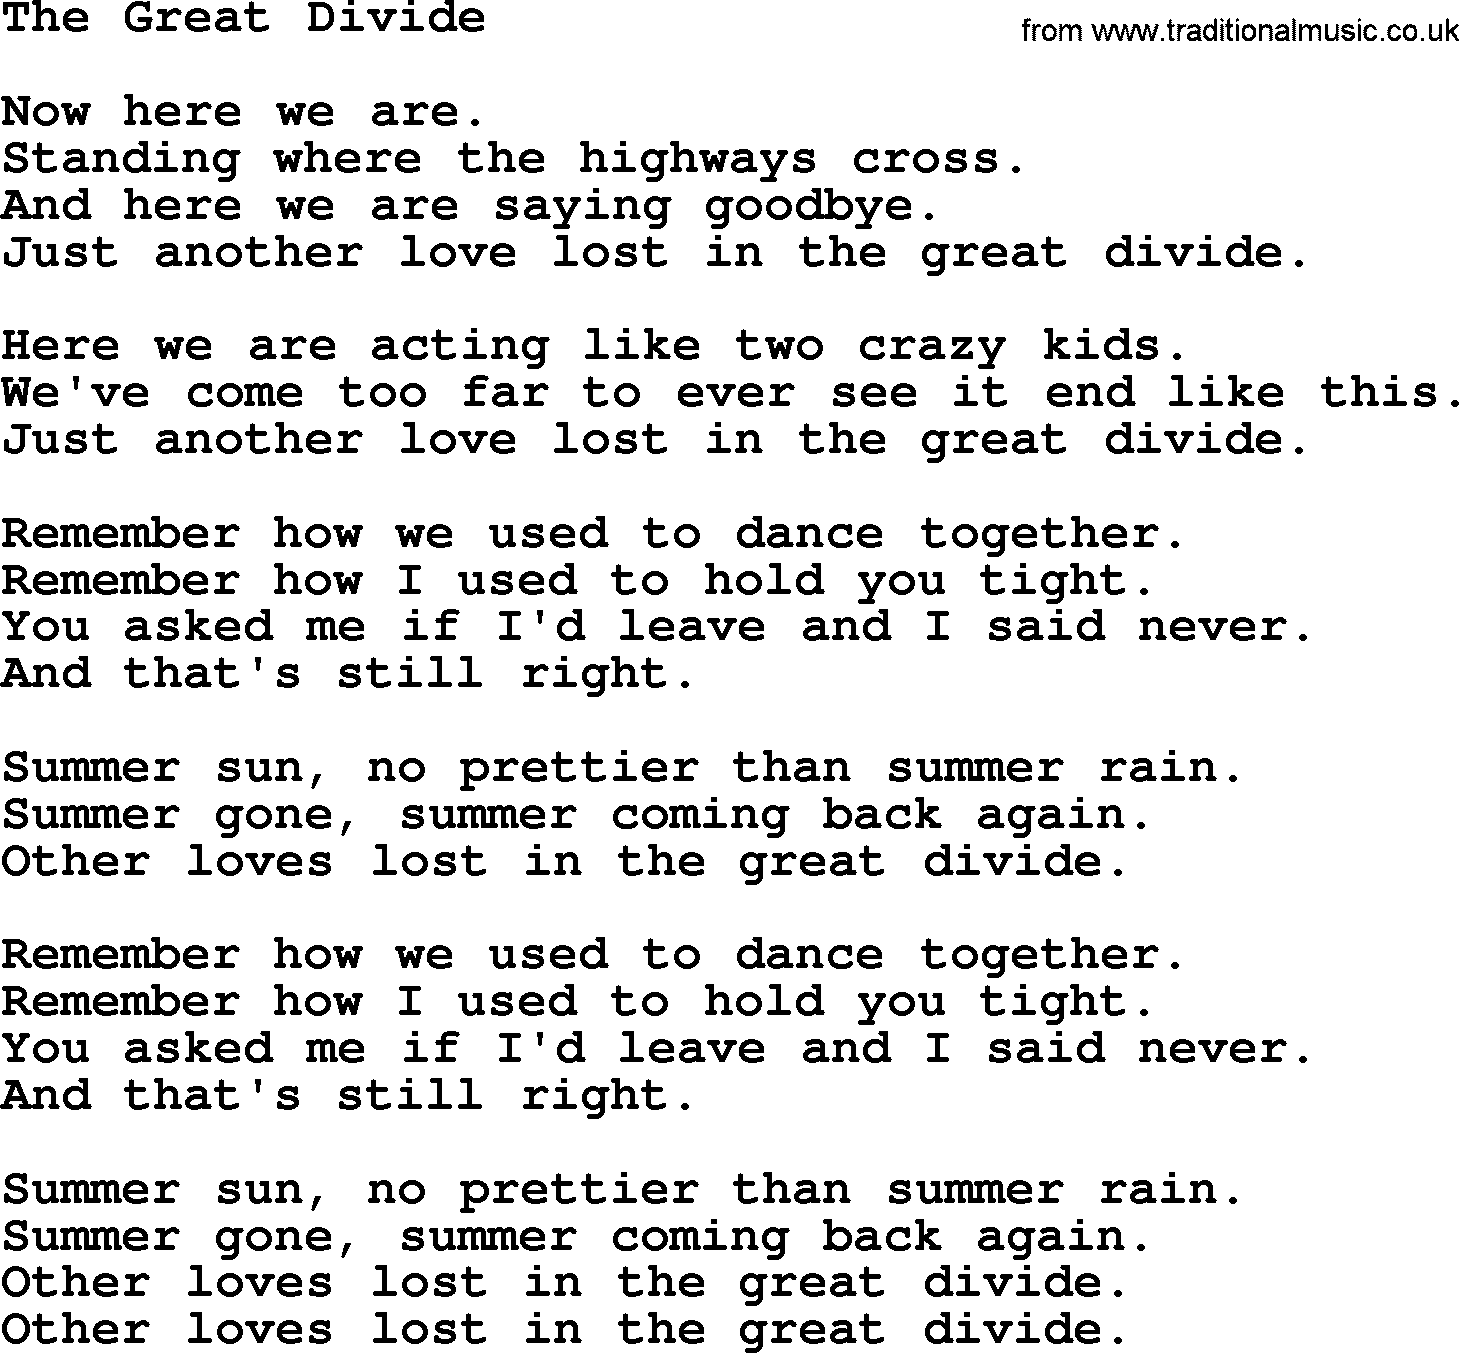 Willie Nelson song: The Great Divide lyrics